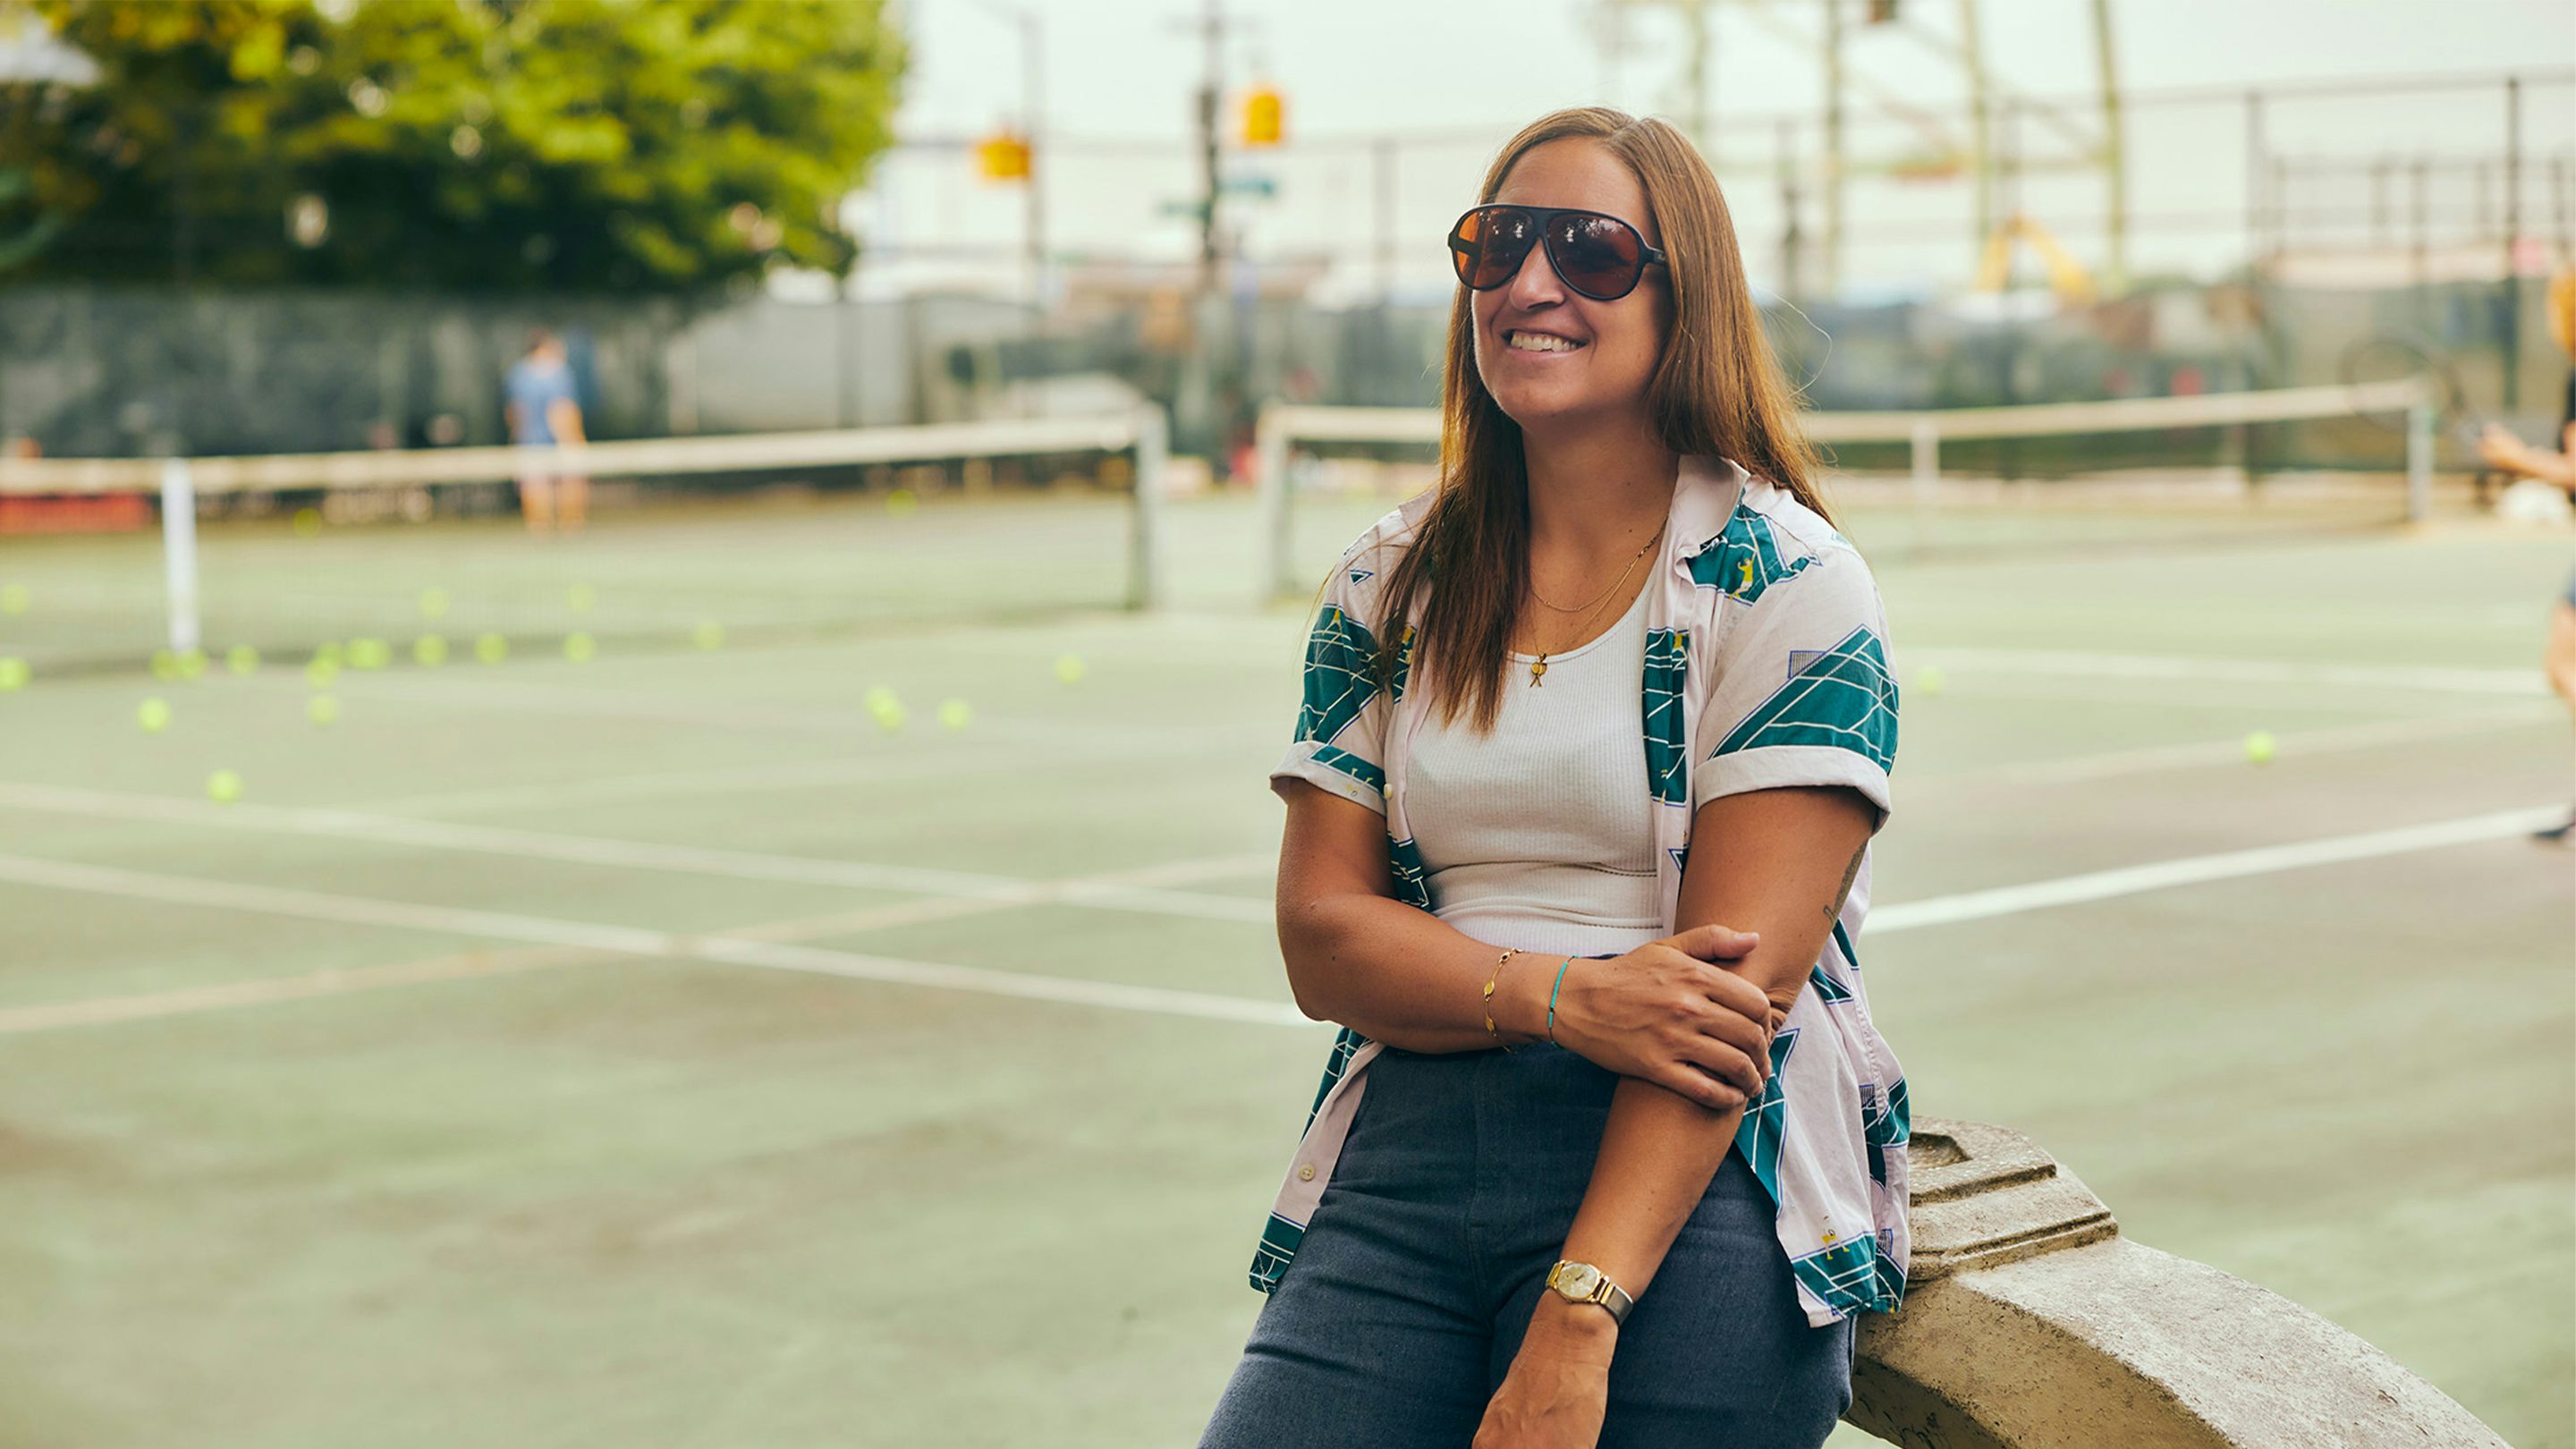 Caitlin Thompson Of Racquet Magazine Discusses Her Grandmother's